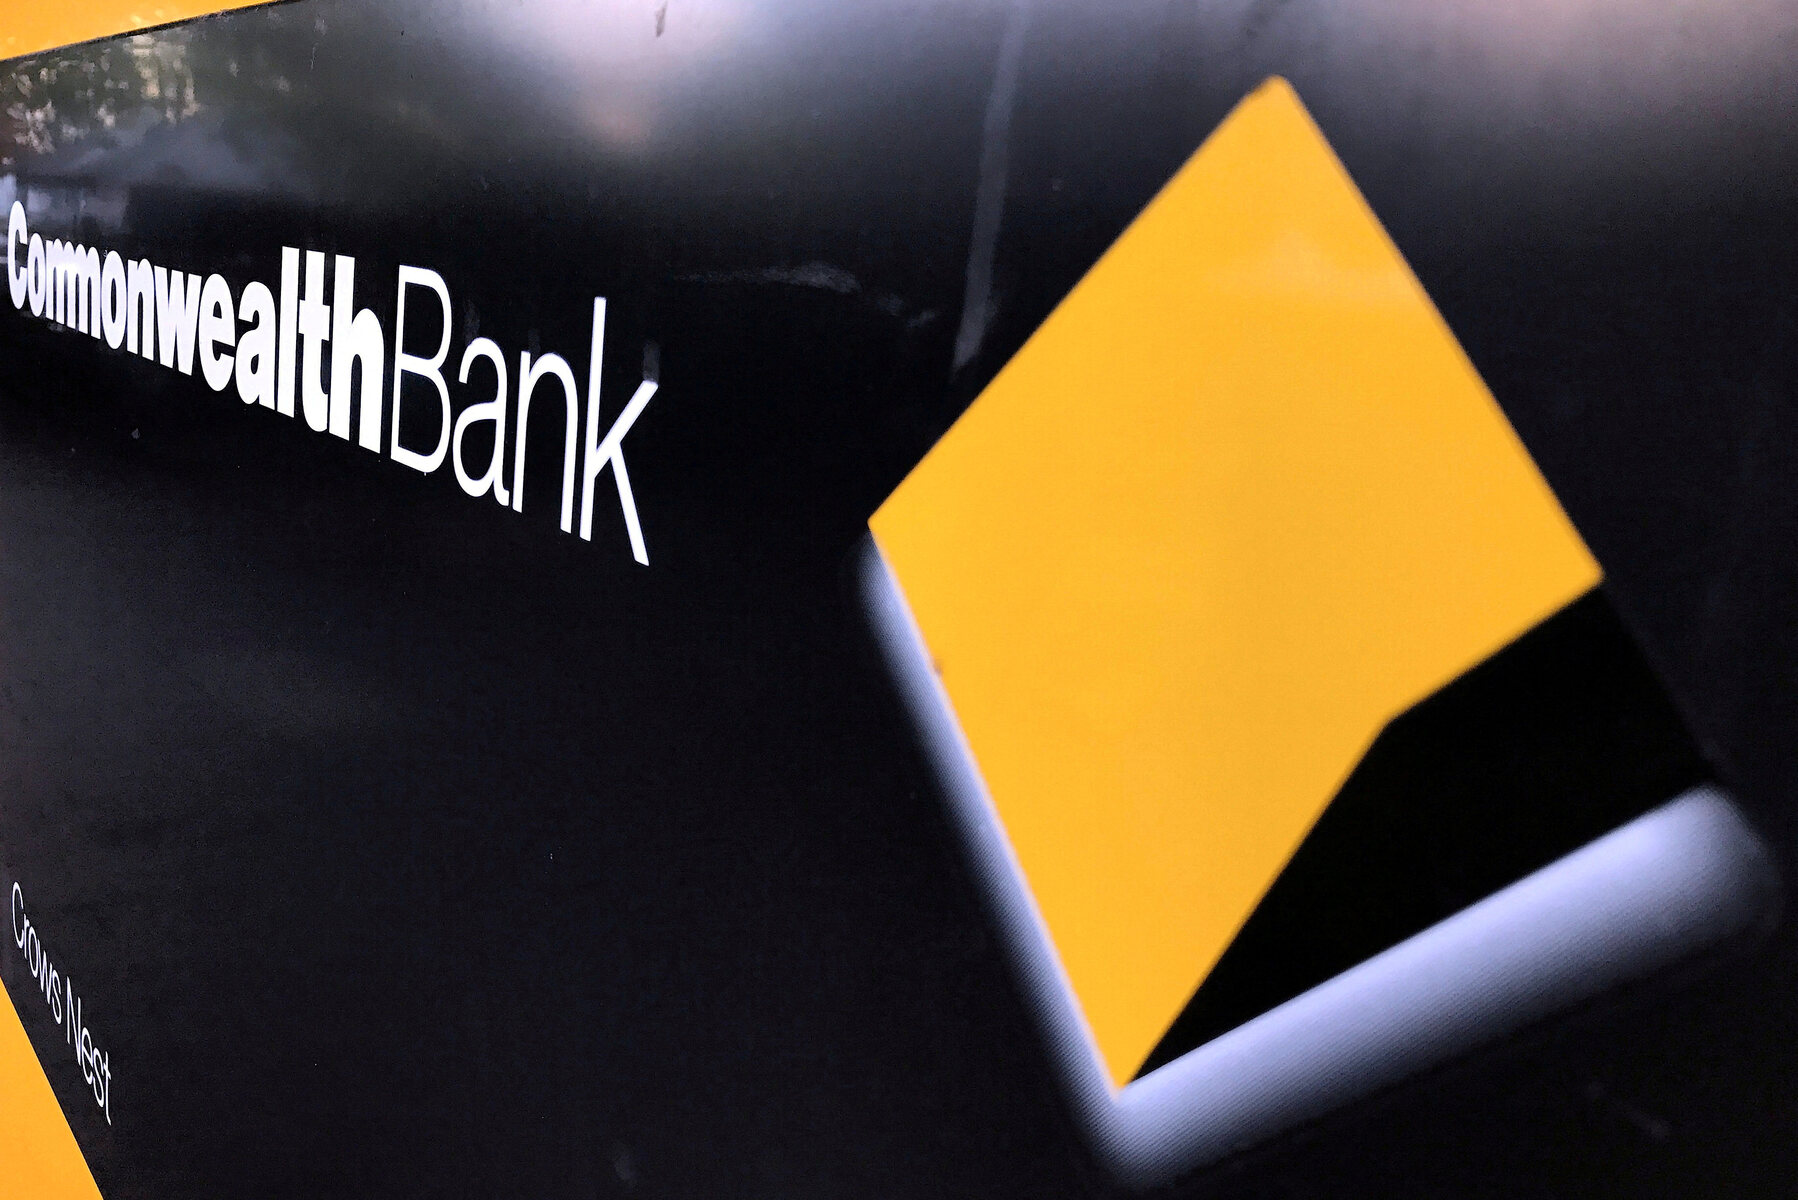 How Long Does International Money Transfer With Commbank Take